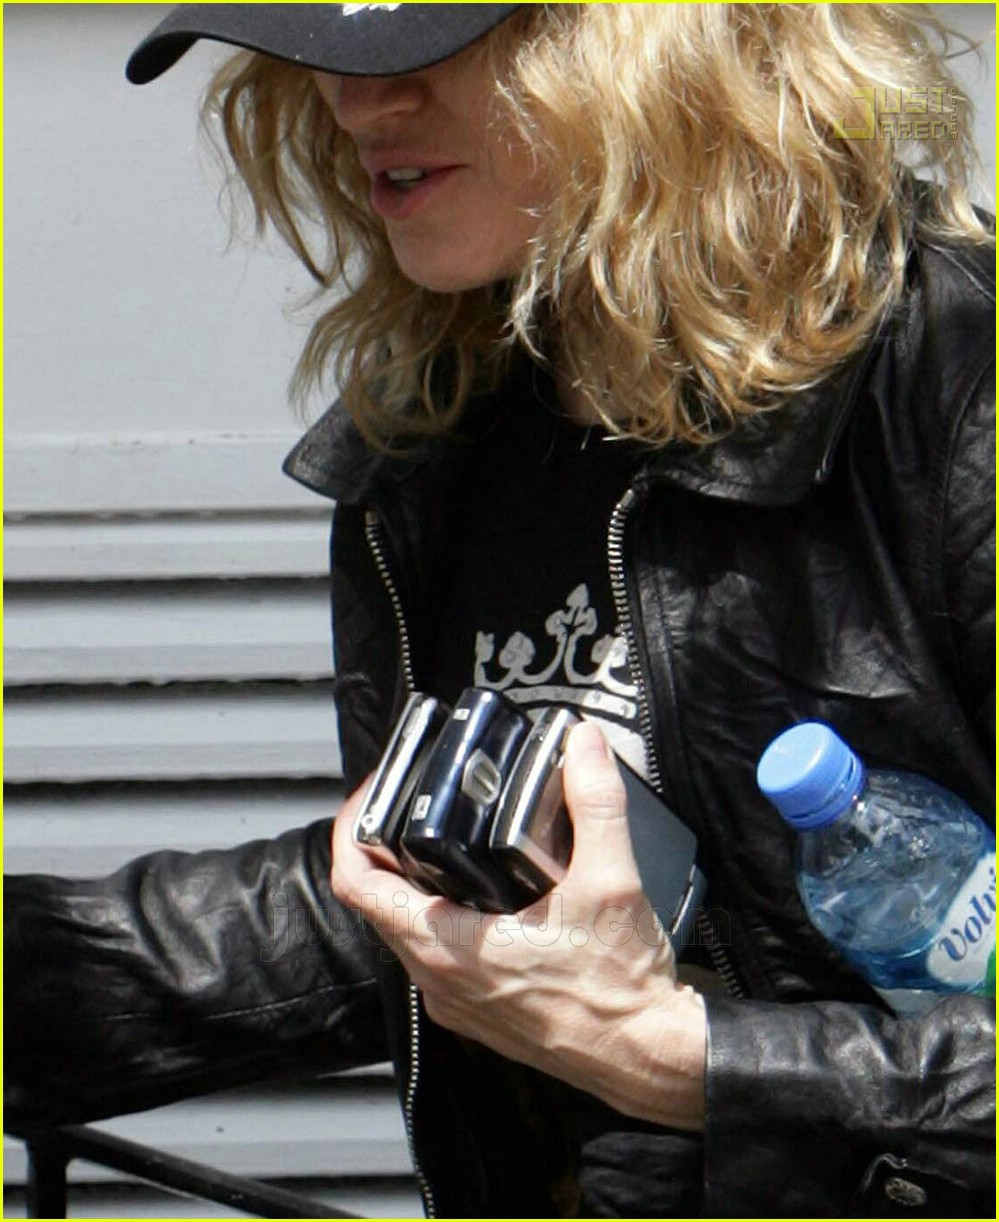 madonna-mobile-devices-05.jpg